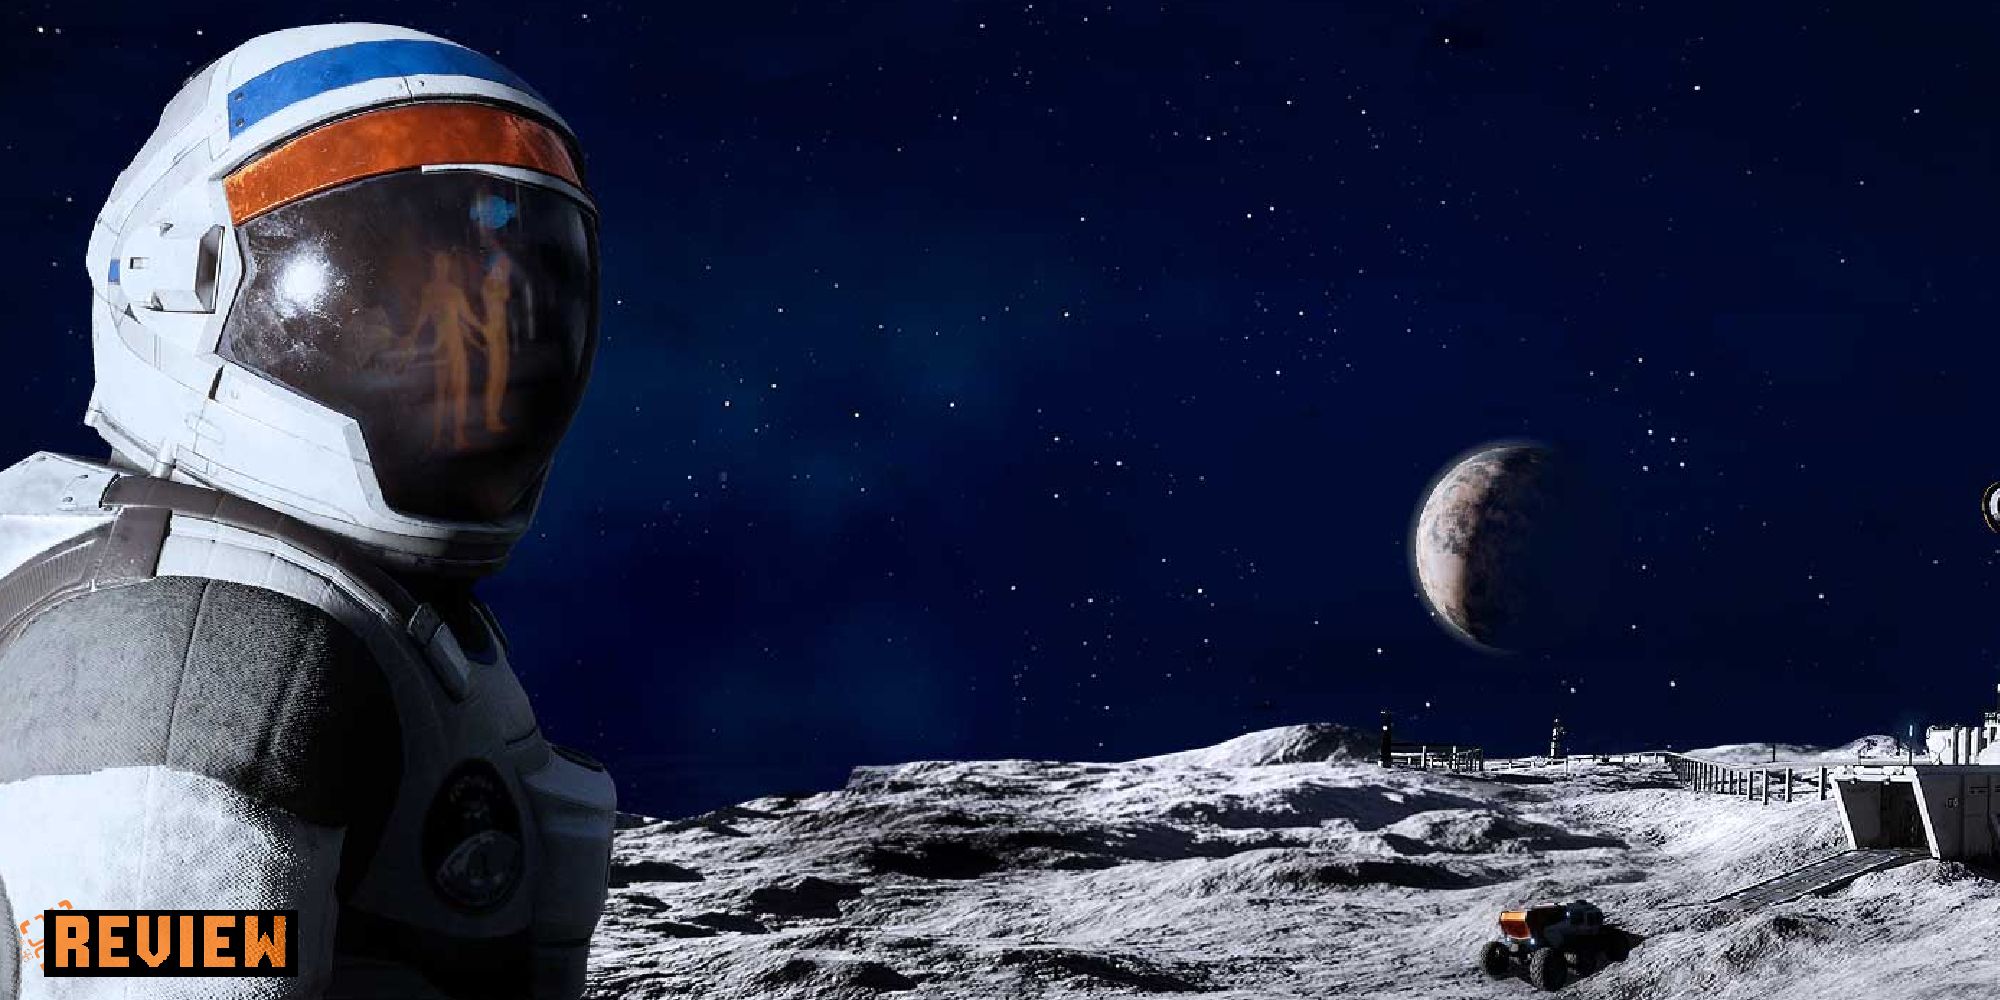 Moon pc. Деливер Мун. Deliver us the Moon игра. Deliver us the Moon ps5. Deliver us the Moon ps4.